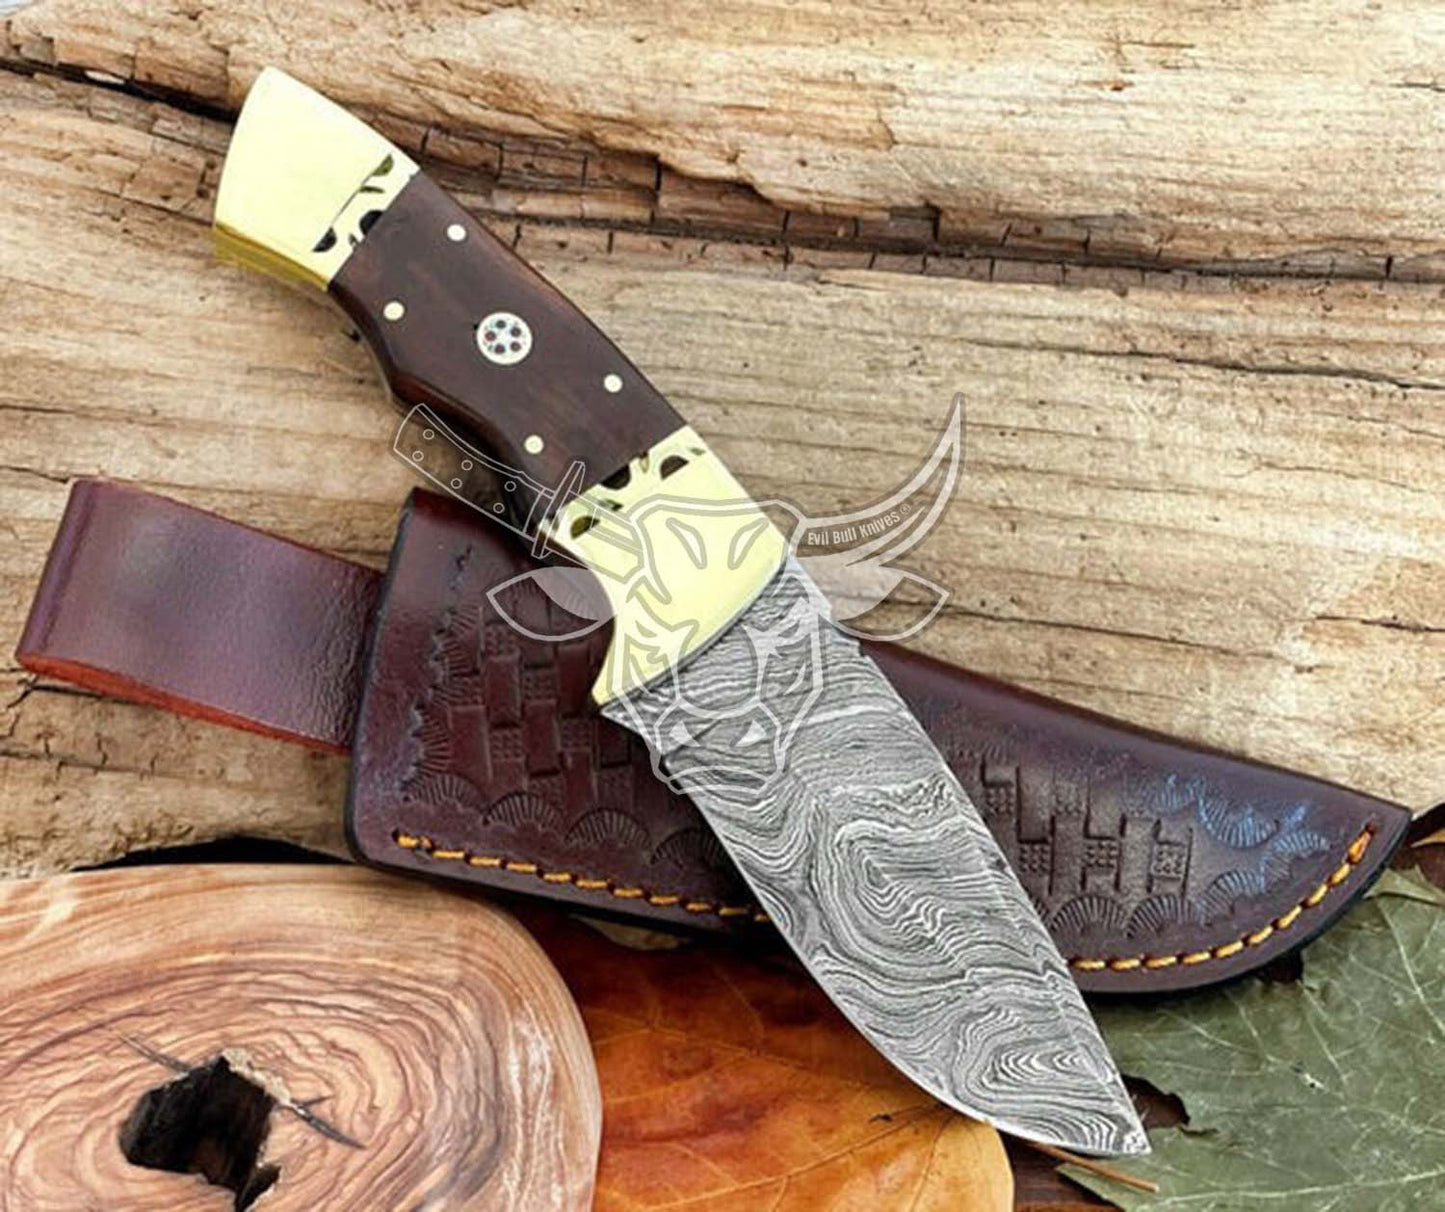 EBK-111 DAMASCUS STEEL KNIFE 9" CUSTOM FIXED BLADE KNIFE BRASS WITH ROSE WOOD HANDLE GIFT FOR HIM